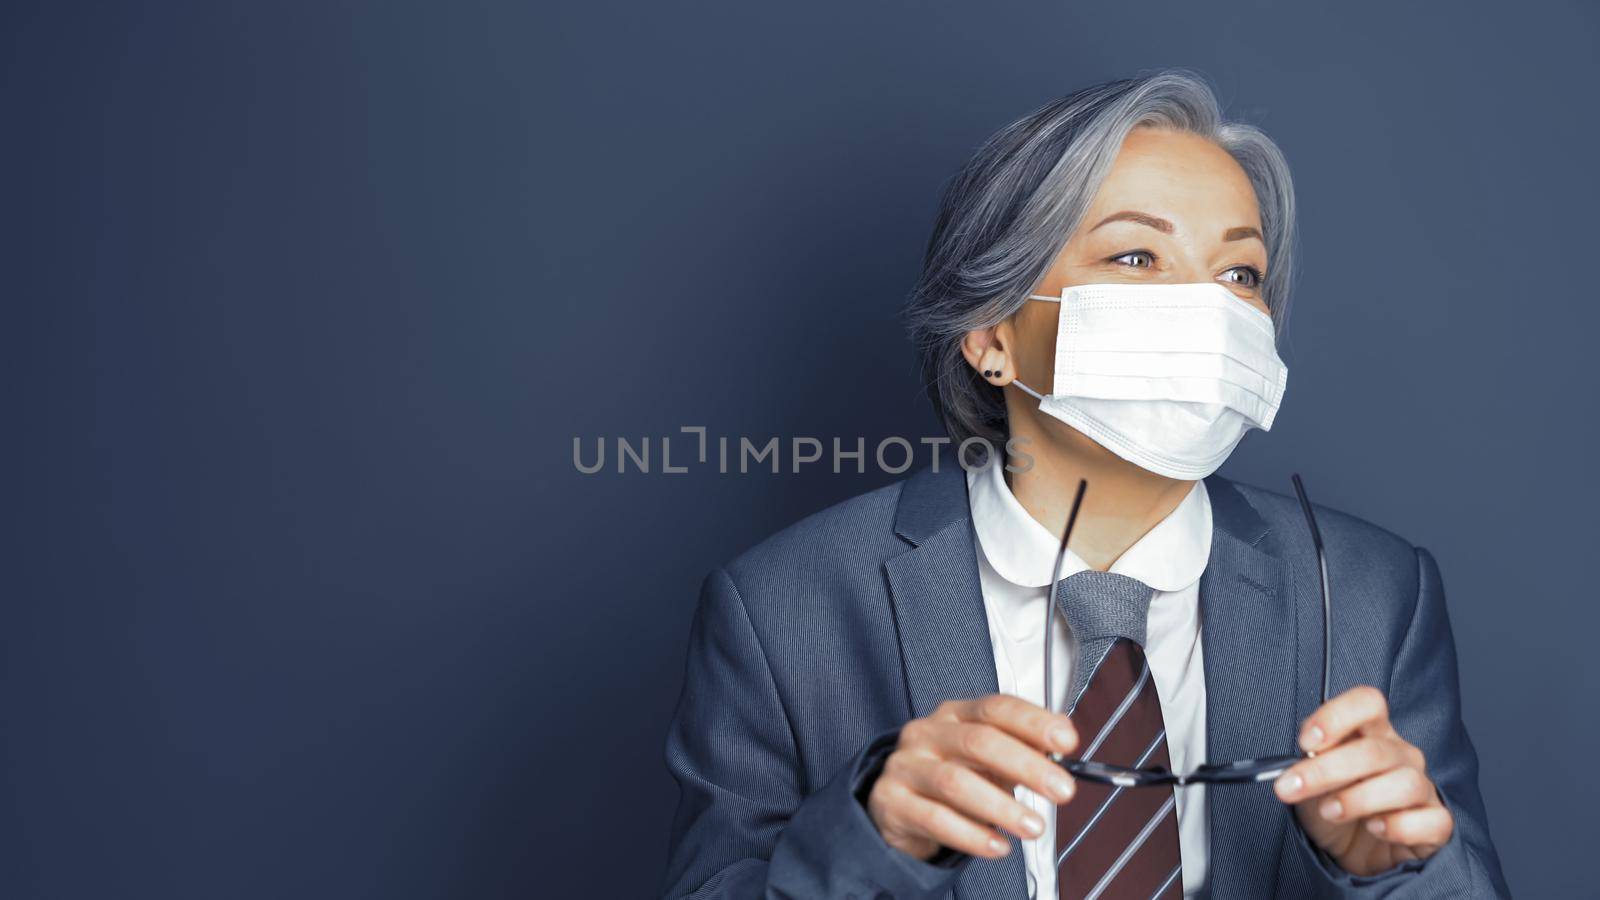 Businesswoman in protective mask holds eyeglasses looking aside. Pretty mature woman wearing business gray suit in motion on gray background with text space on left. Portrait. Toned image.